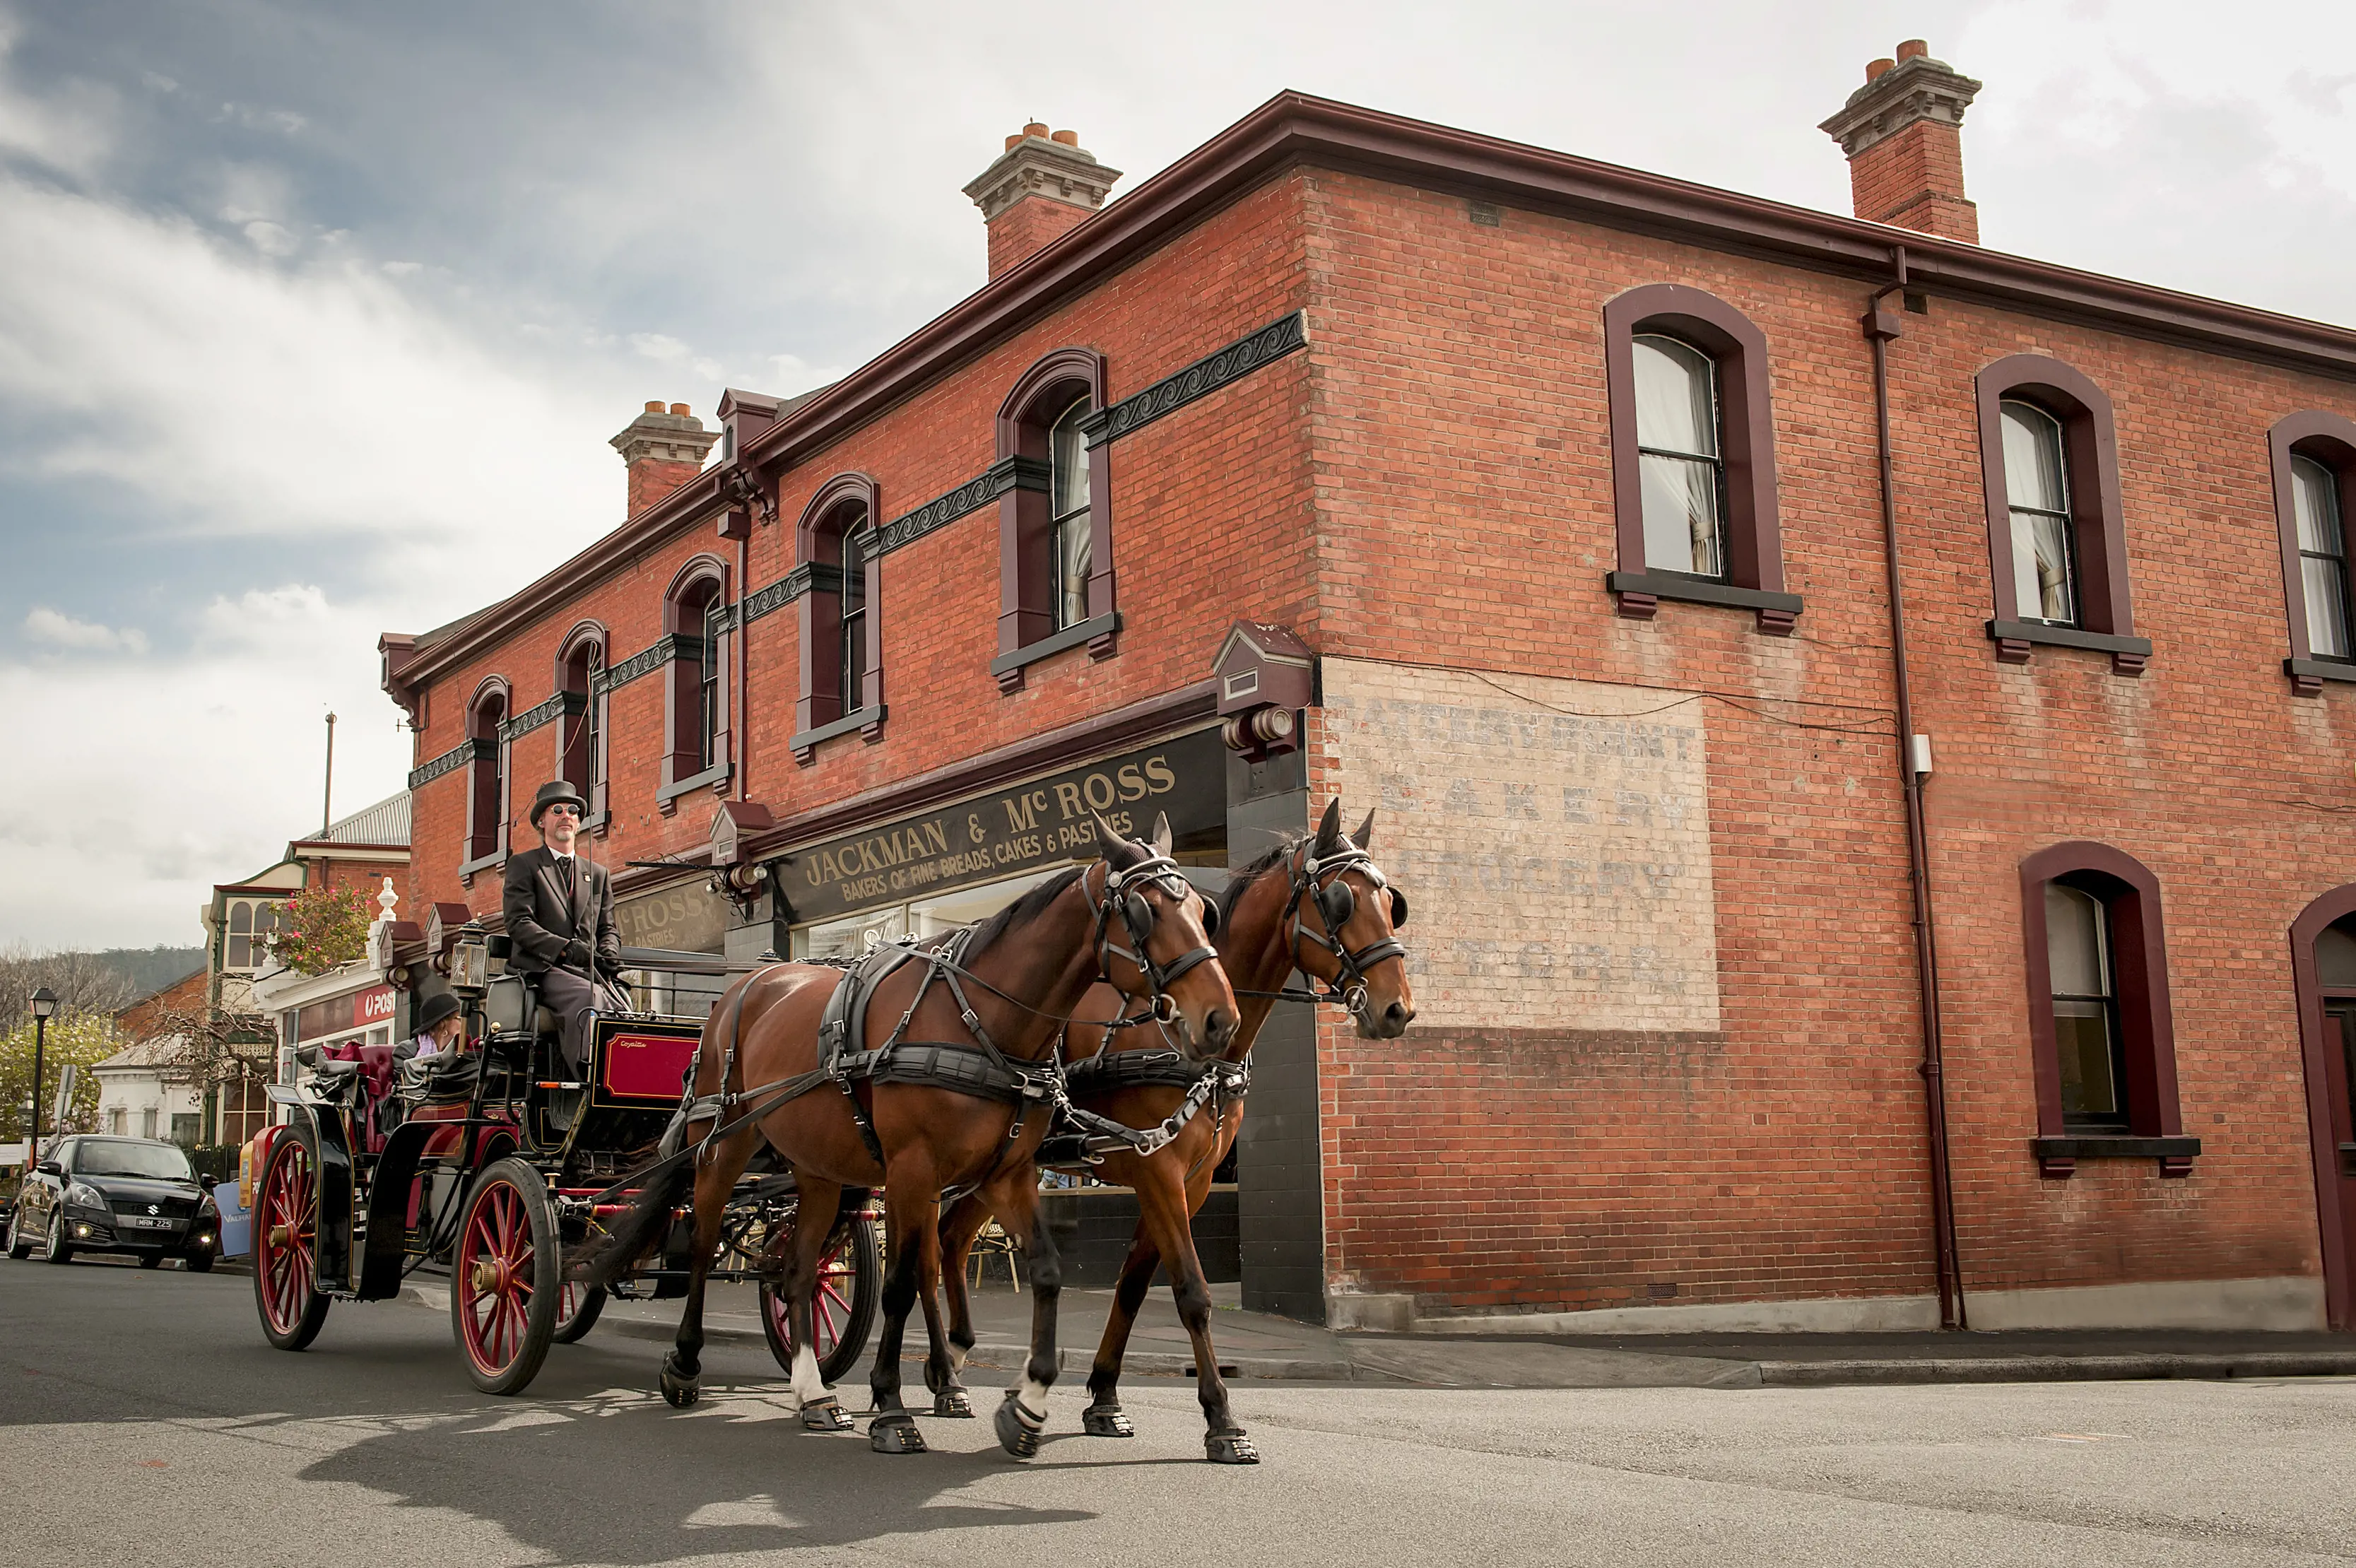 A horse drawn carriage, pulled by two large horses moves down a Hobart street, with a red brick building in the background.